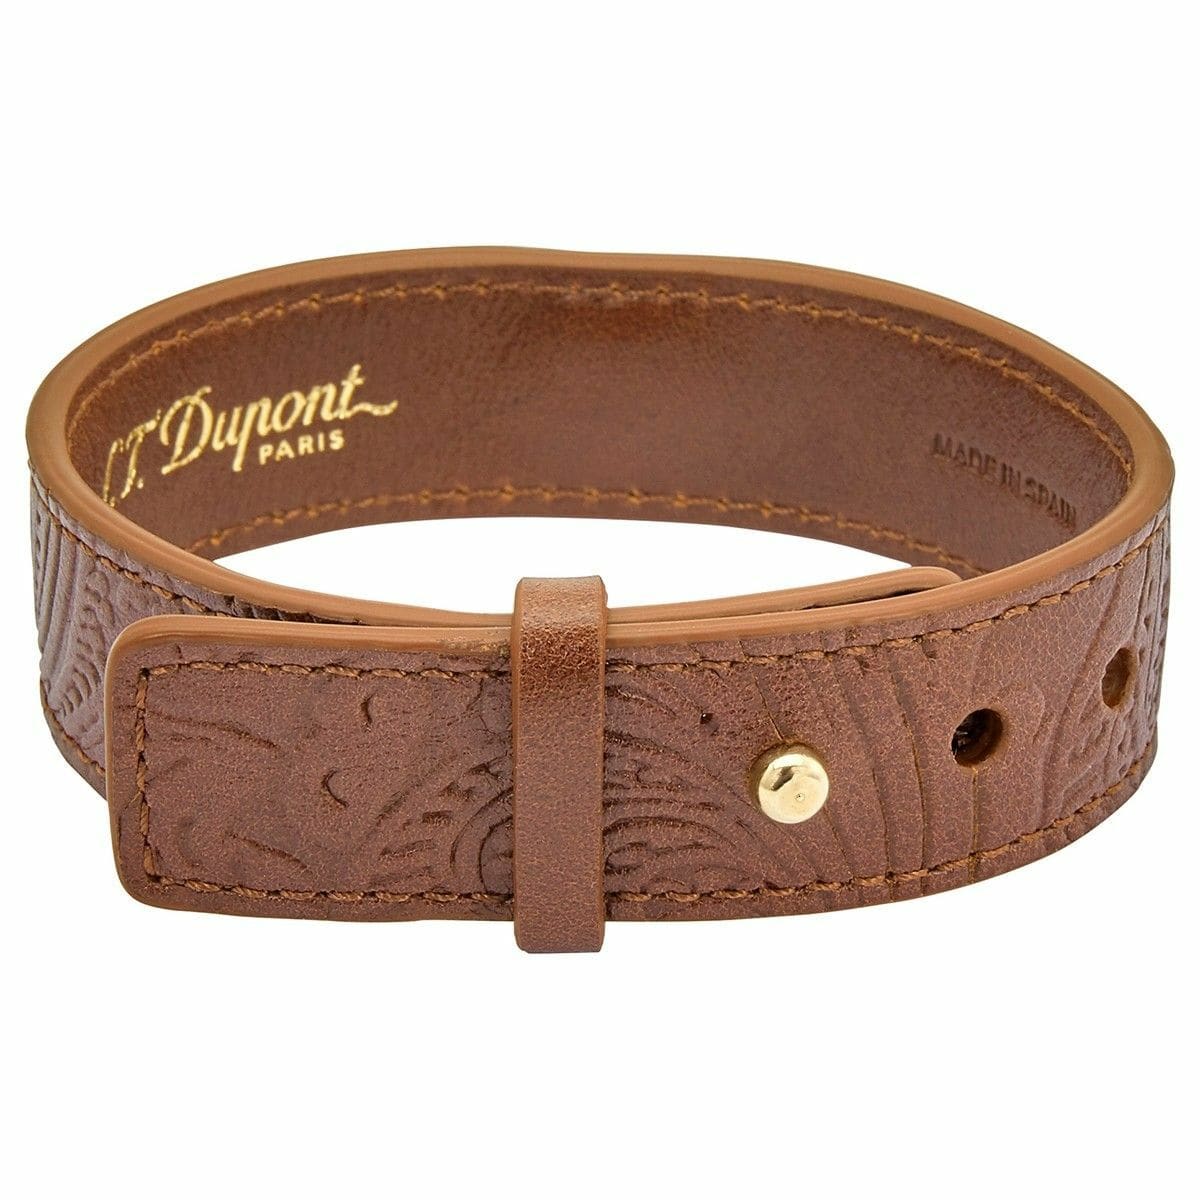 S.T. Dupont Pirates of the Caribbean Brown Leather Bracelet 003201PC 3597390234650